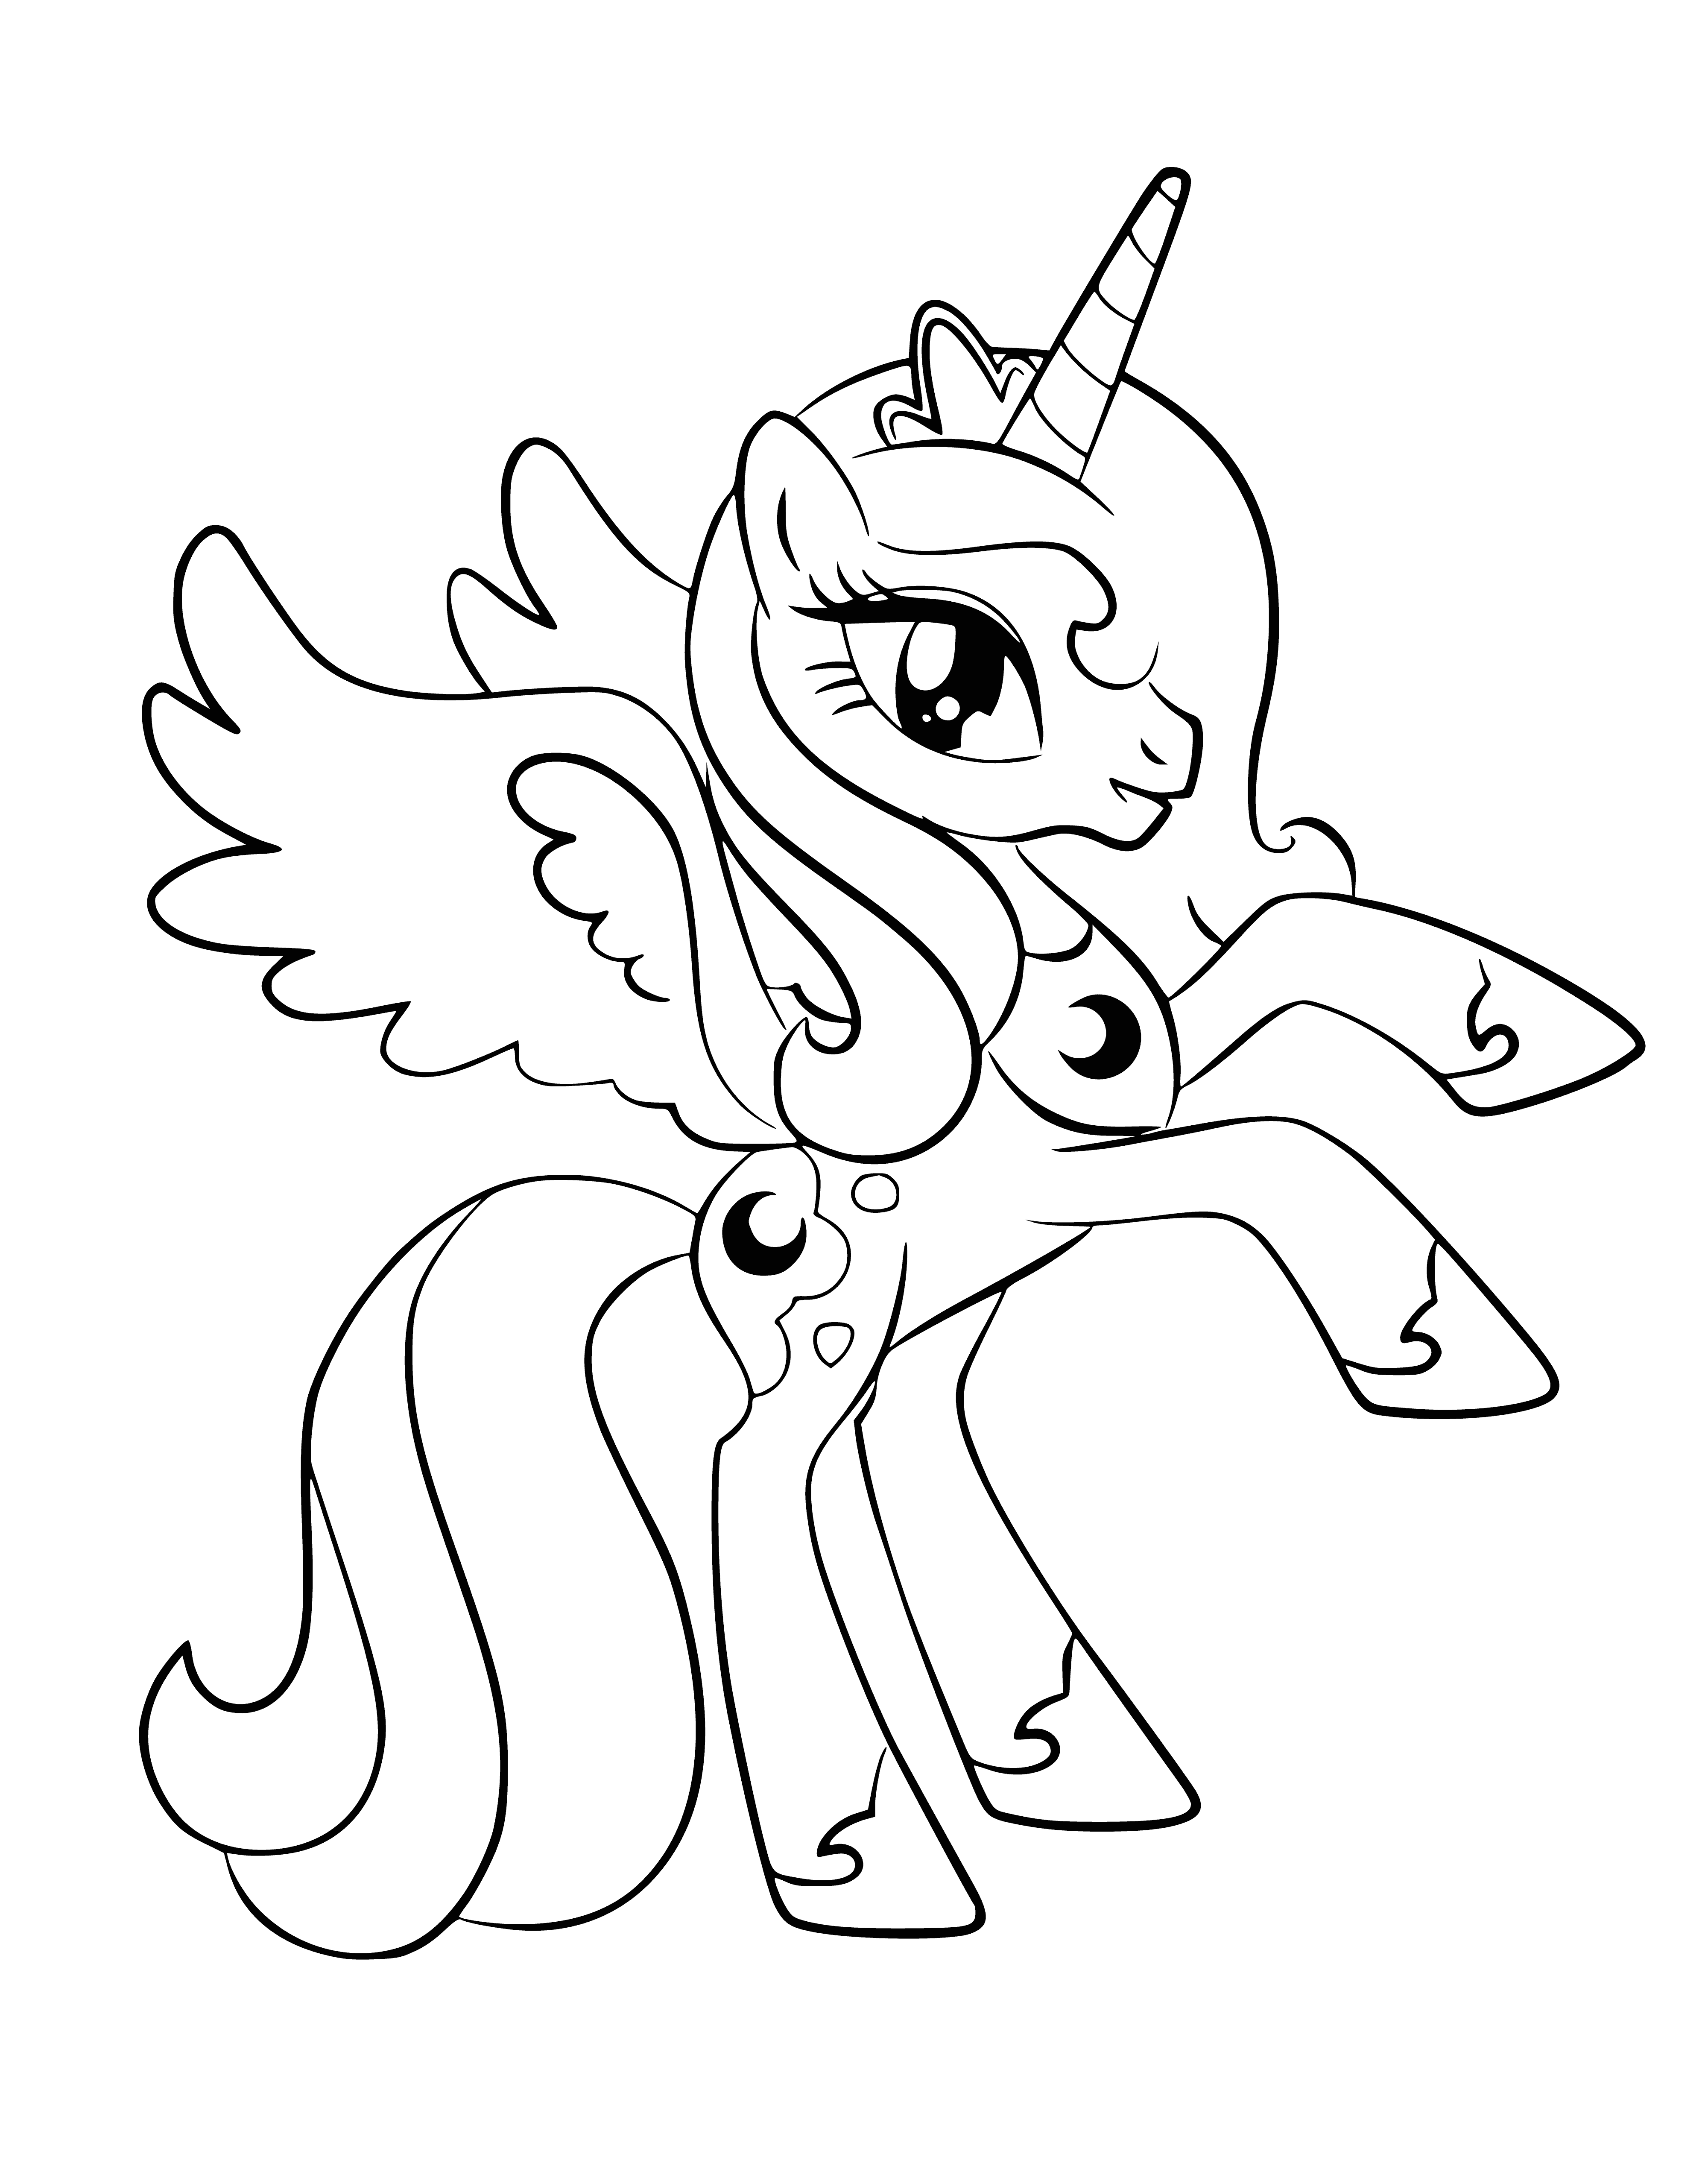 coloring page: The Princess Luna stands in a beautiful night sky with stars shining bright, a full moon, and her blue crescent moon forehead. Surrounded by beauty, she looks up at the moon with a gentle expression.